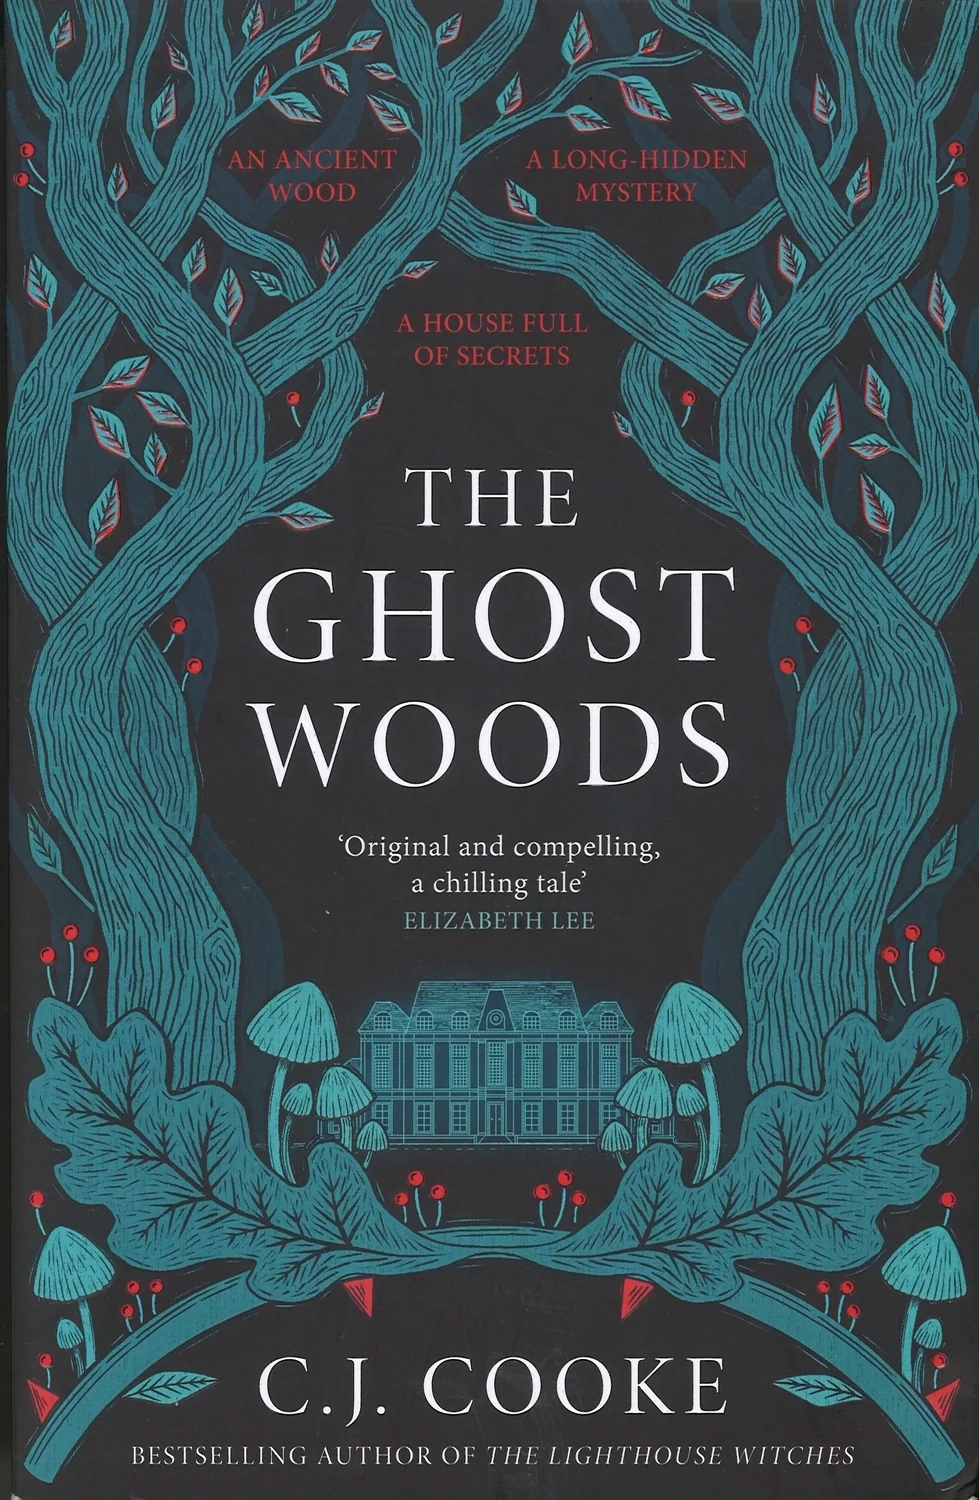 The Ghost Woods by C. J. Cooke